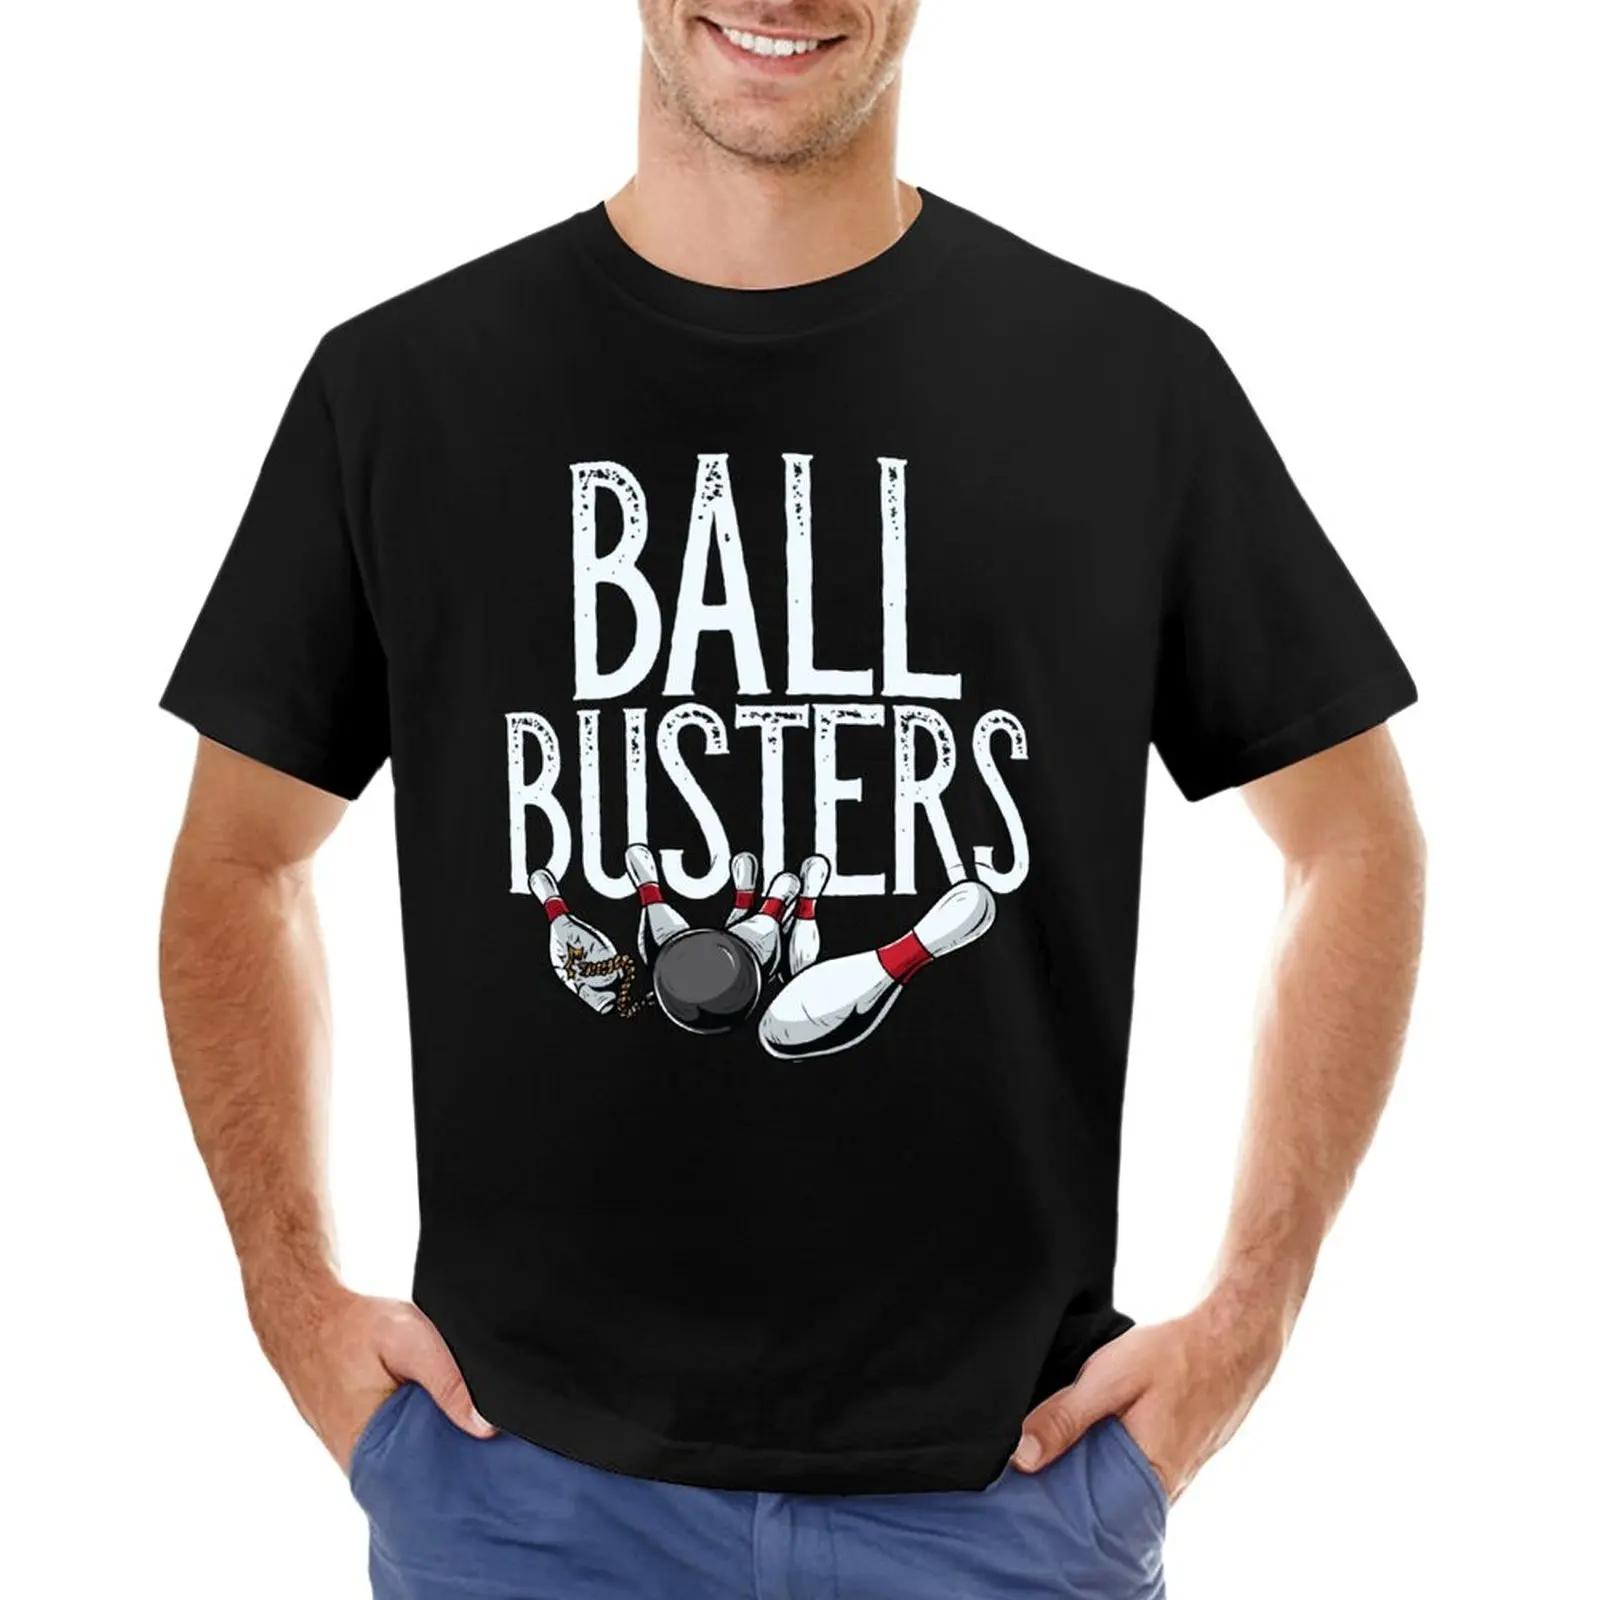 Ball Busters, Funny Bowling Team Name T-Shirt t-shirts man plus size t shirts mens graphic t-shirts funny